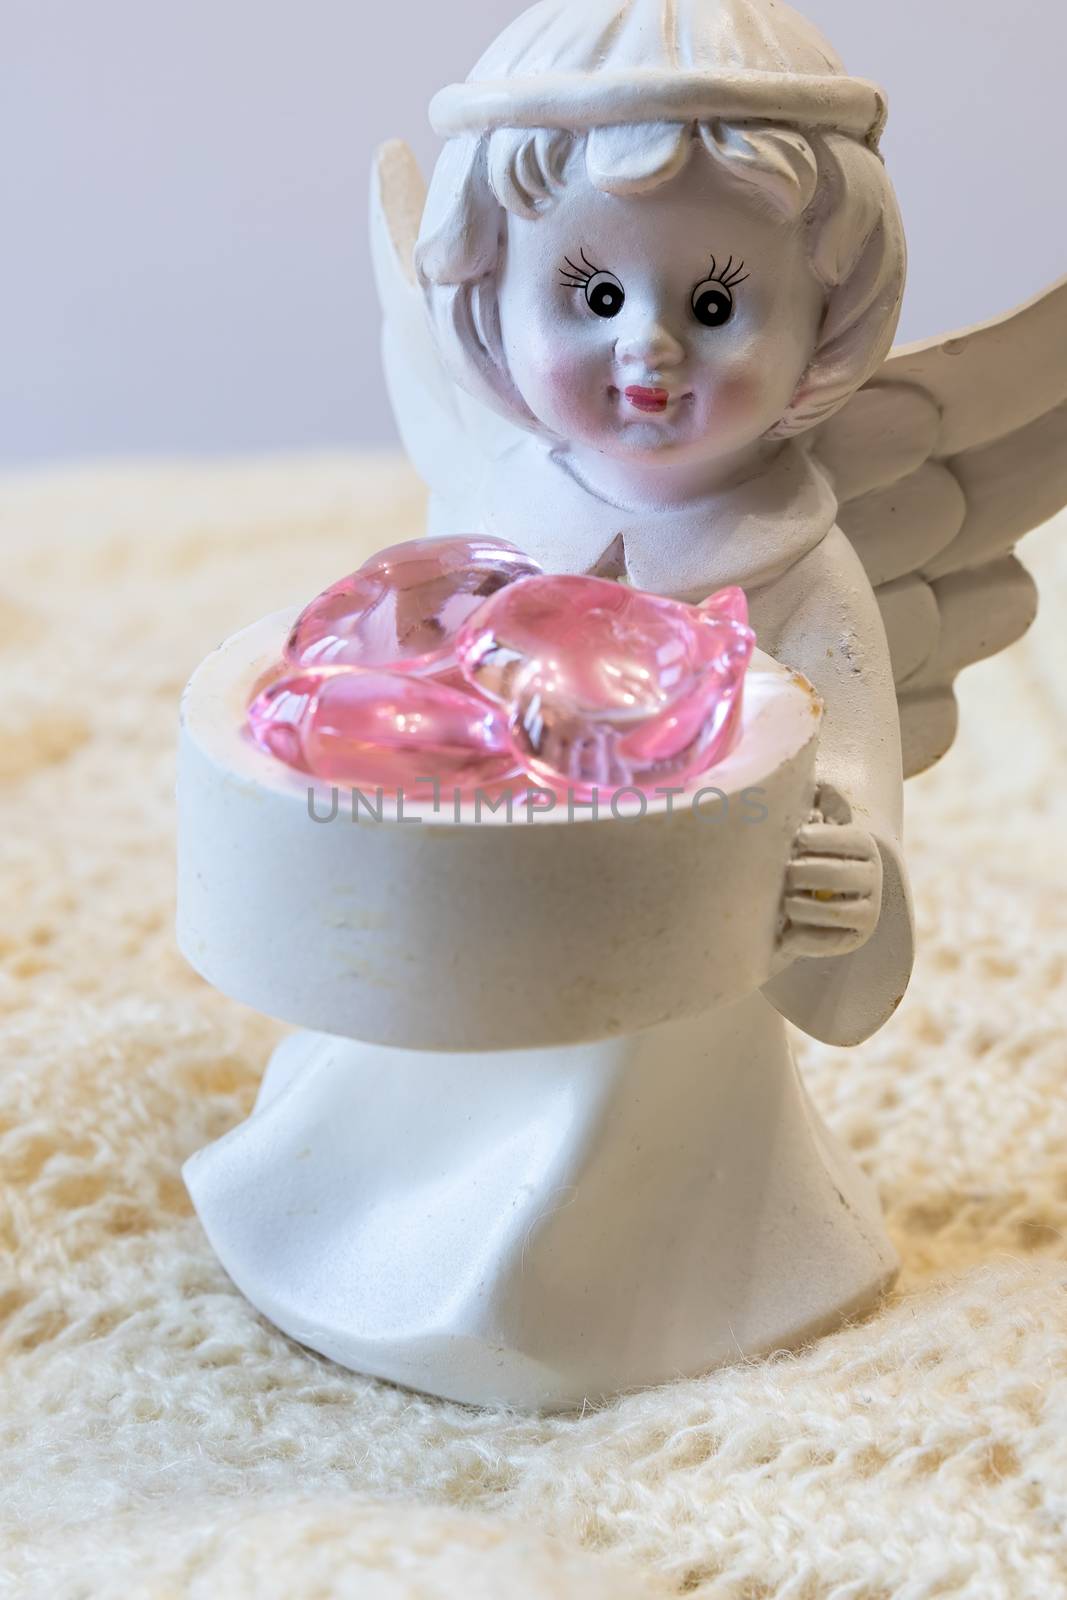 White ceramic figurine of an angel holding a basket with pink hearts, on a light background by bonilook